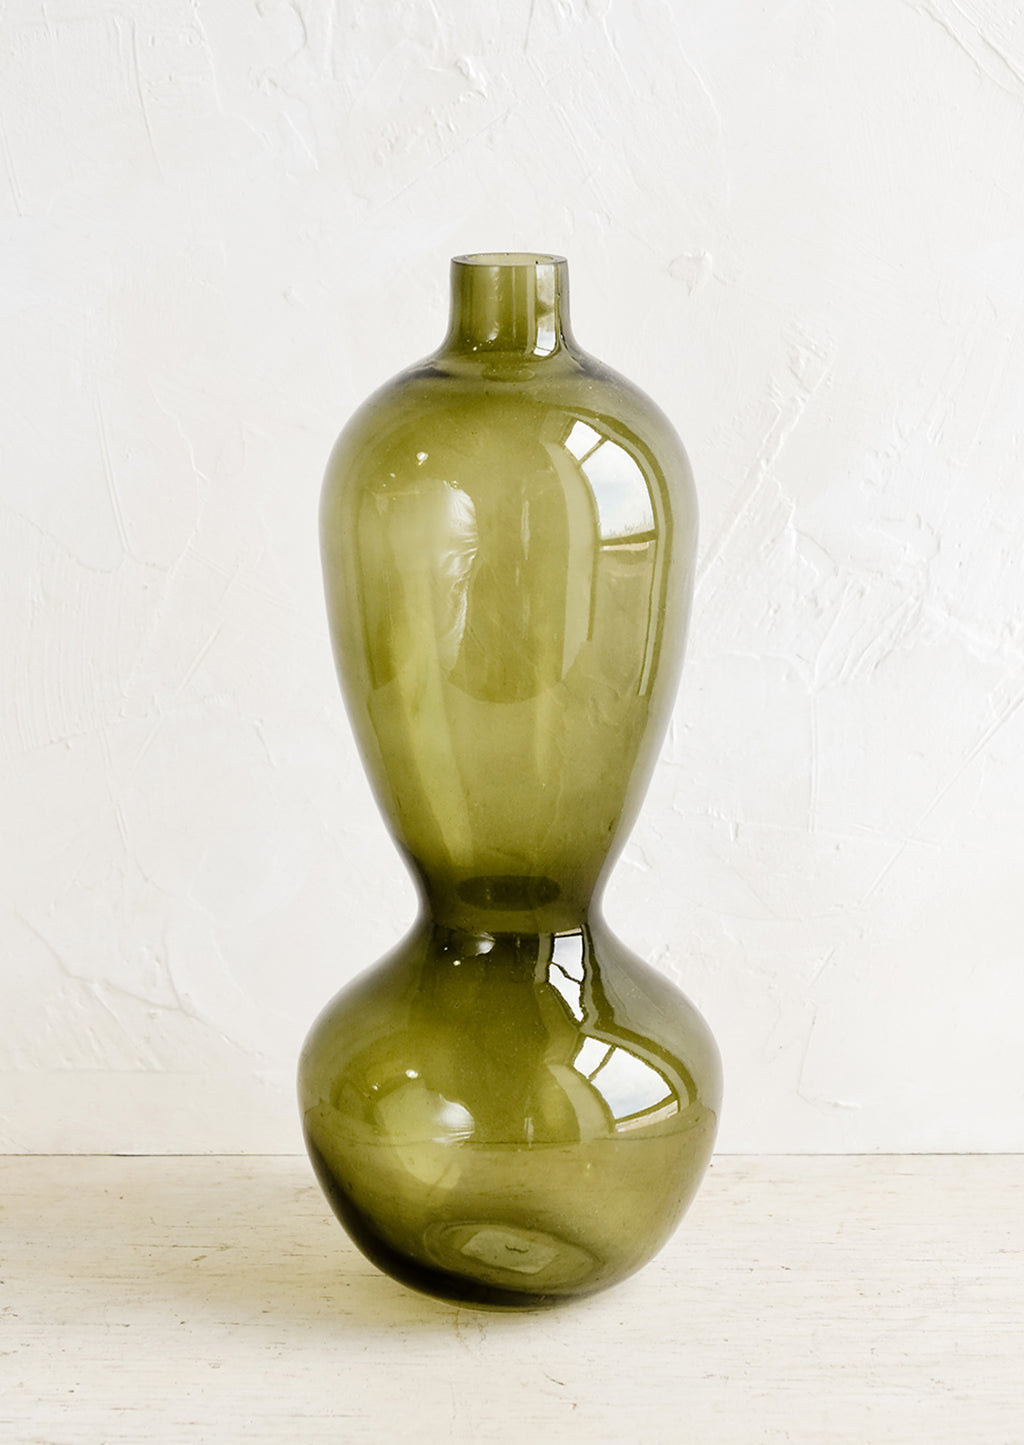 1: A tall glass vase in hourglass silhouette.